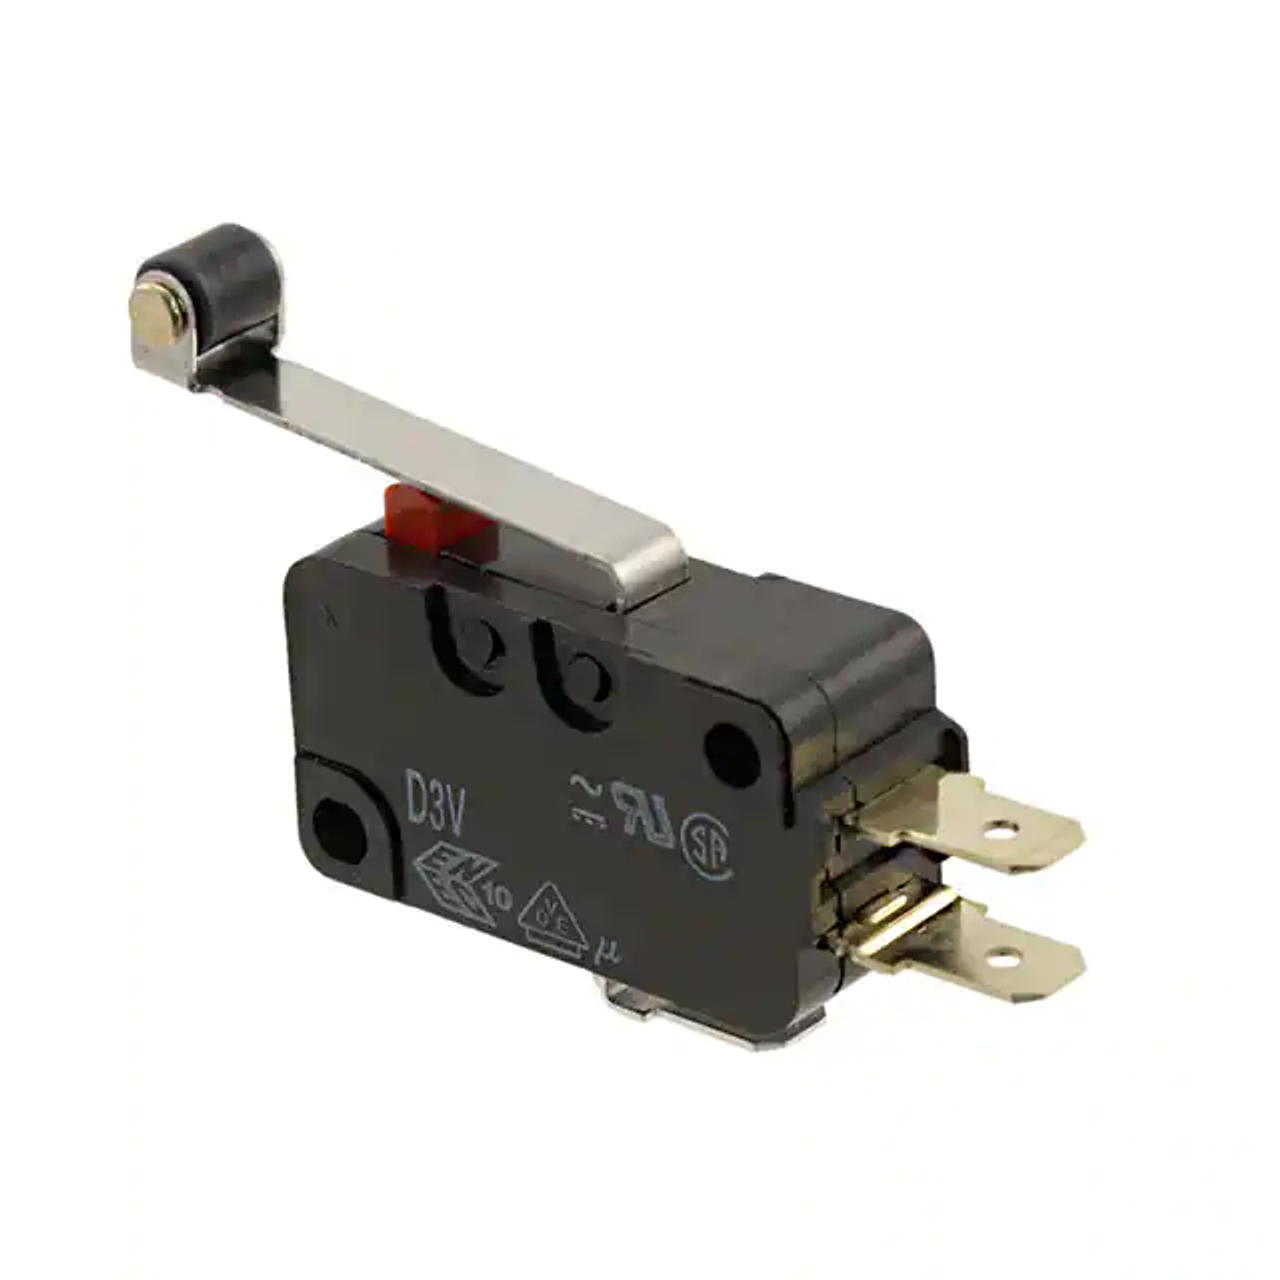 Omron D3V-66M-2A4 Basic, Snap-Action Switches